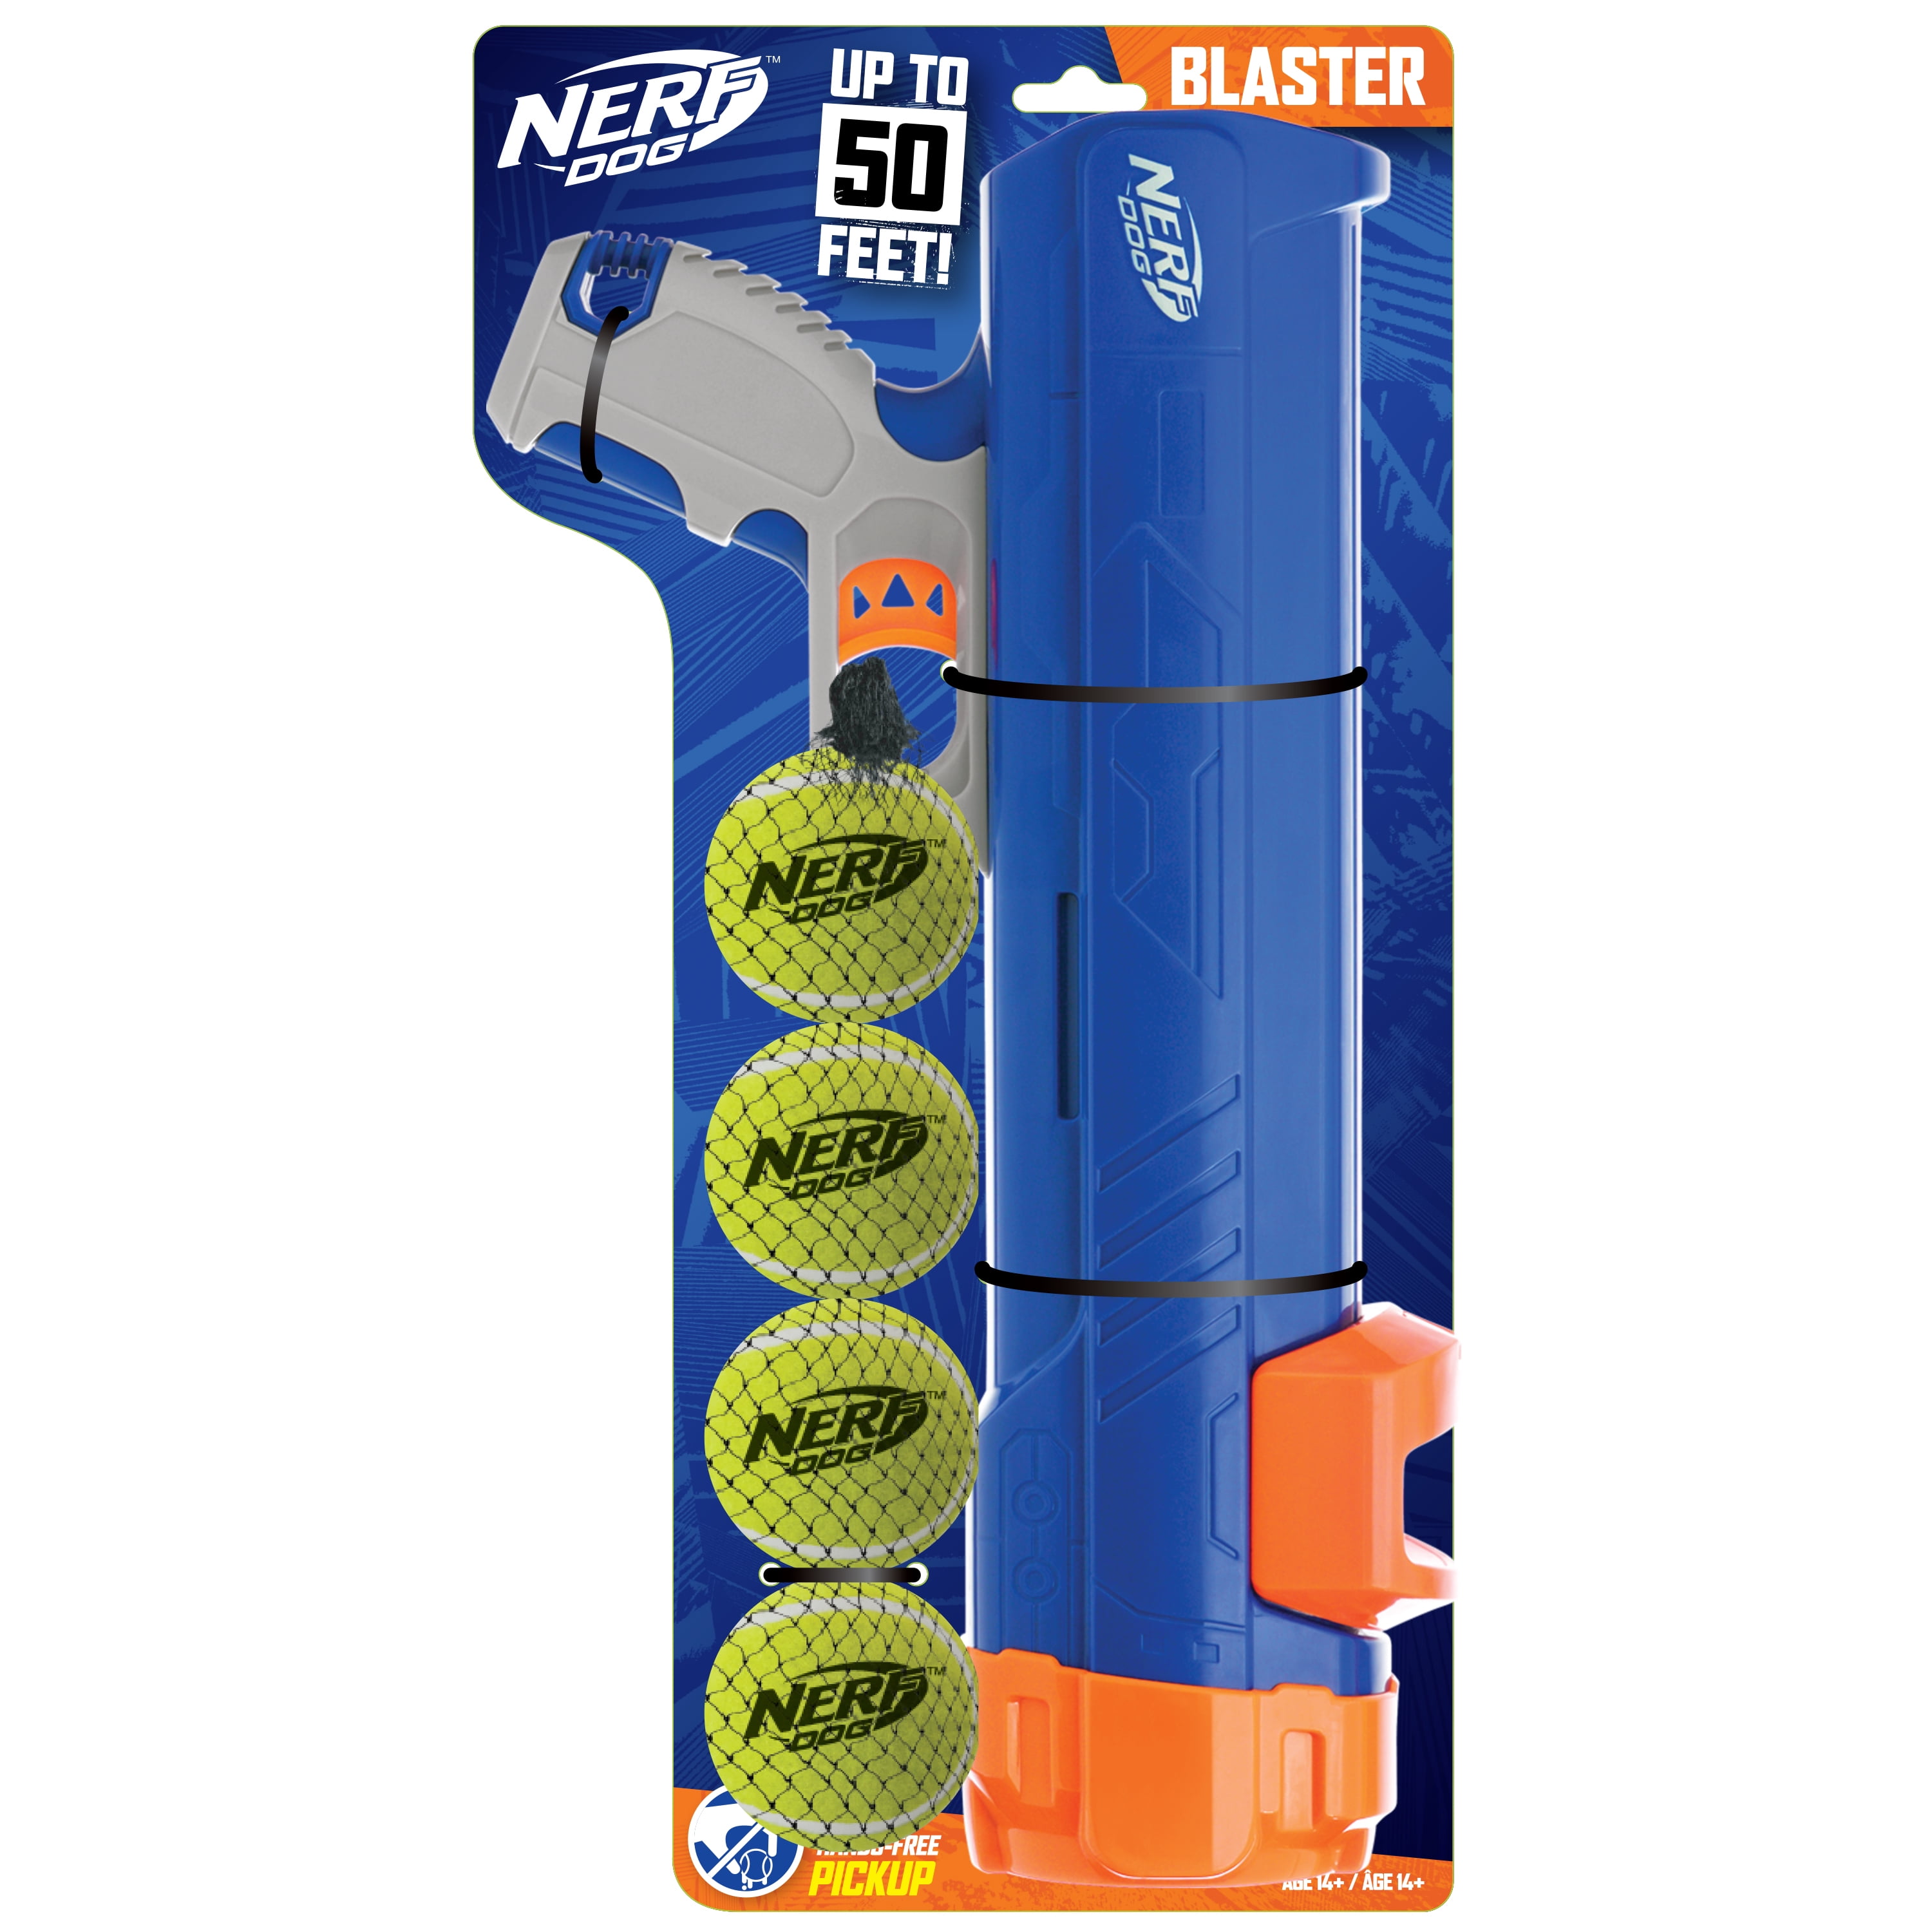 Nerf Dog Tennis Ball Blaster Toy Shoots Up To 50' Includes Ball Great Exercise 